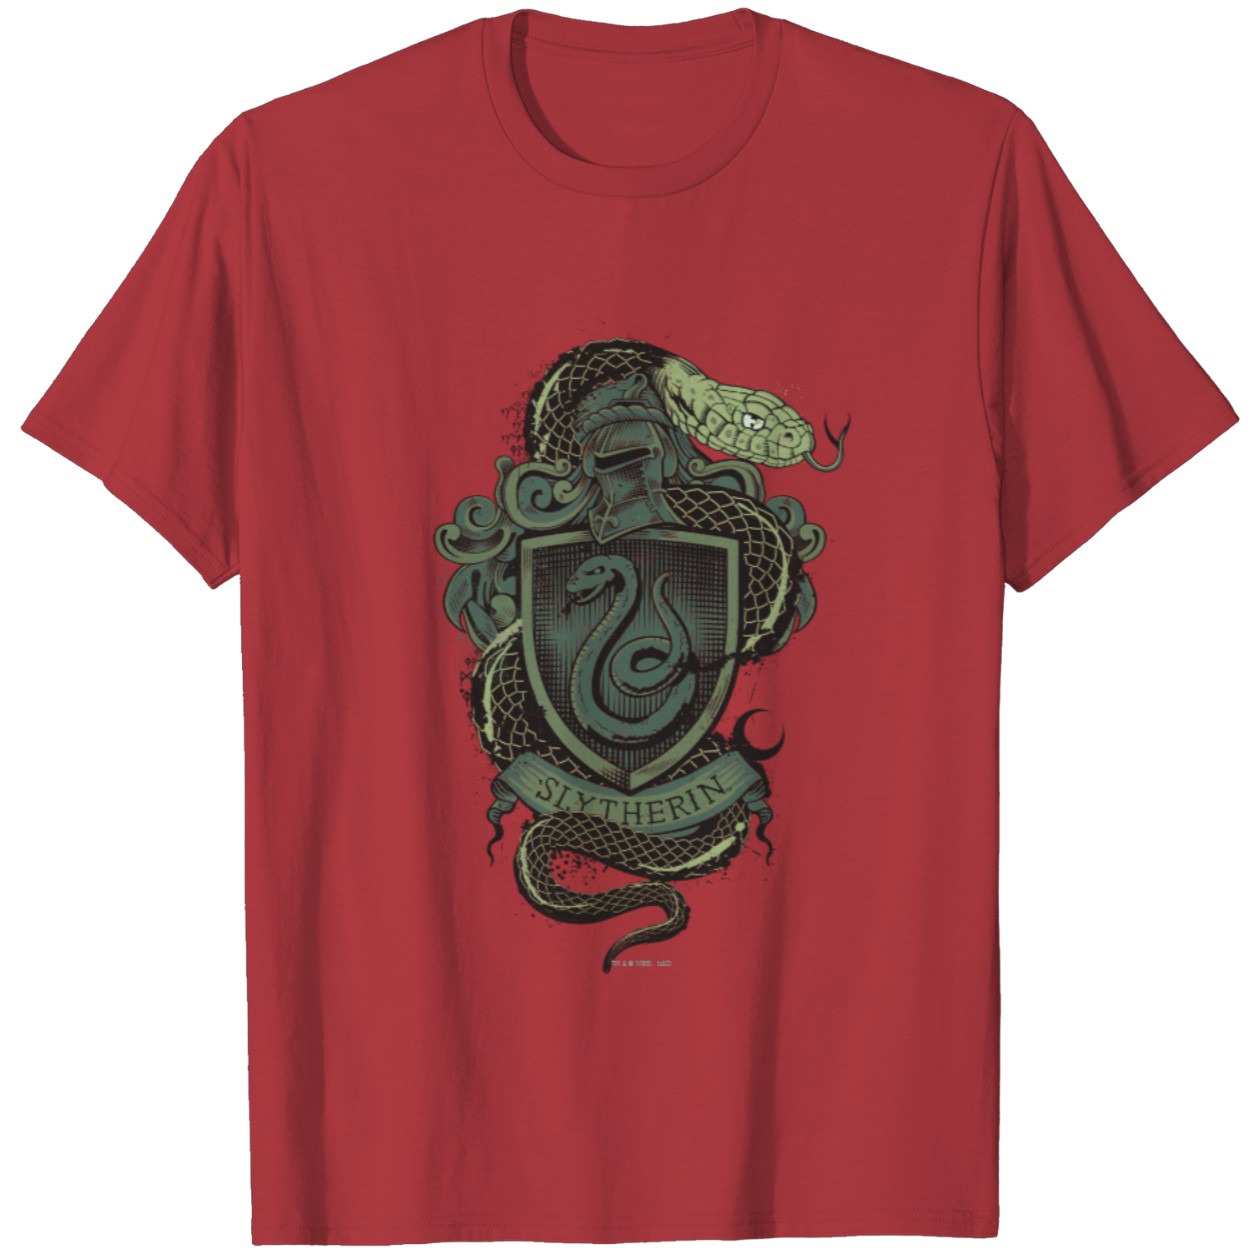 Harry Potter Inspired Slytherin Crest Tee T-Shirt IYT